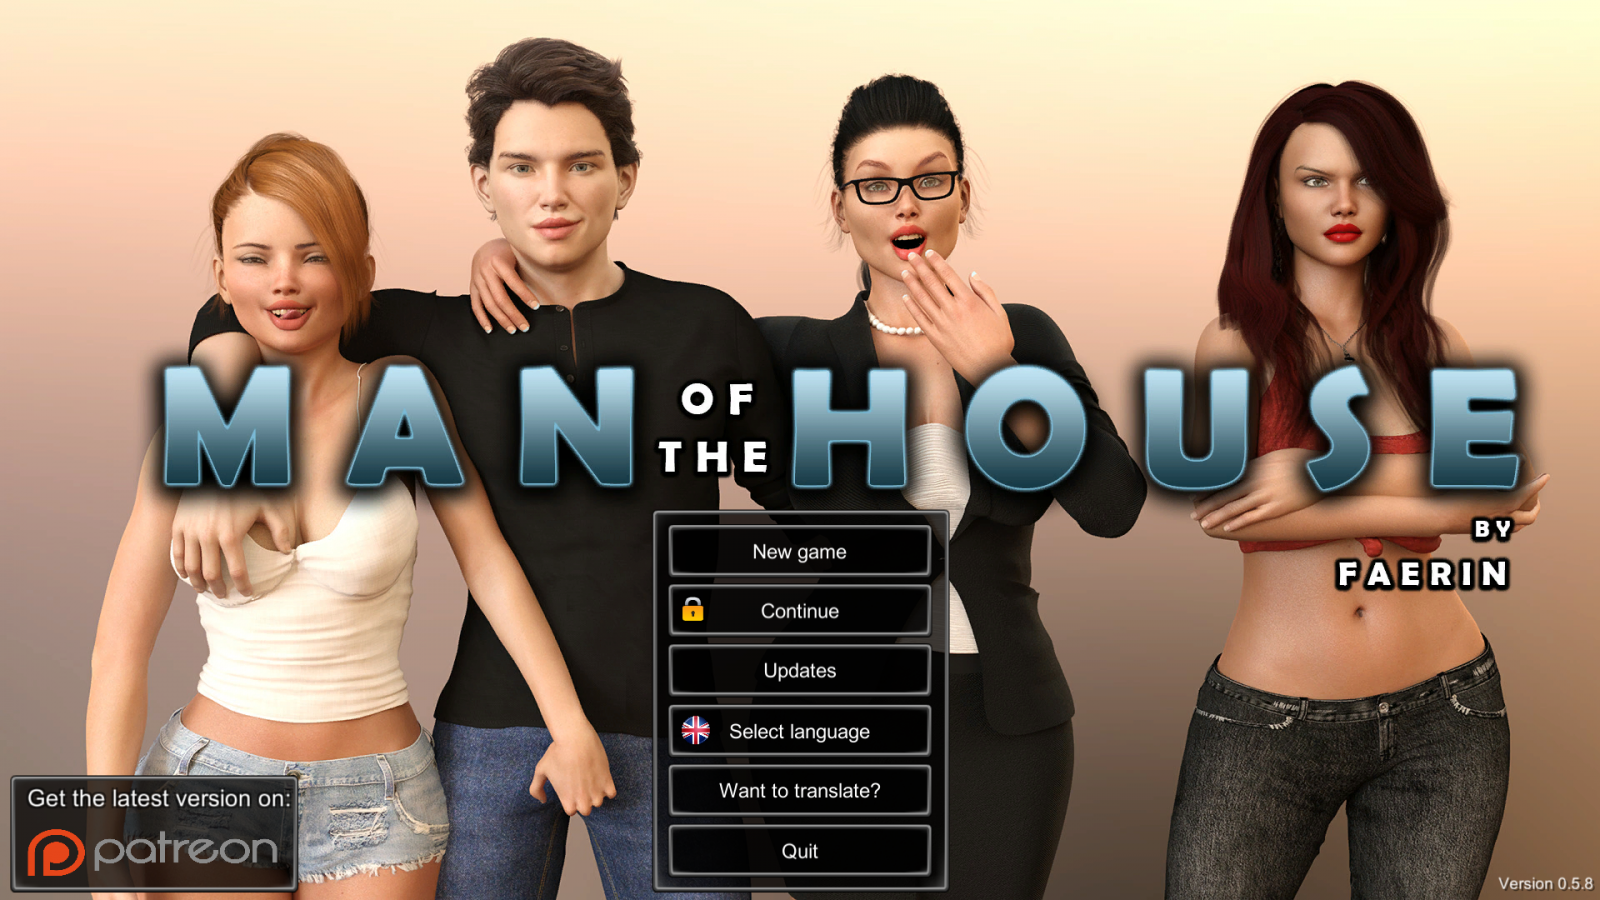 Man of the house Version 0.6.8+ Extra+Incest Patch+Walkthrough by Faerin